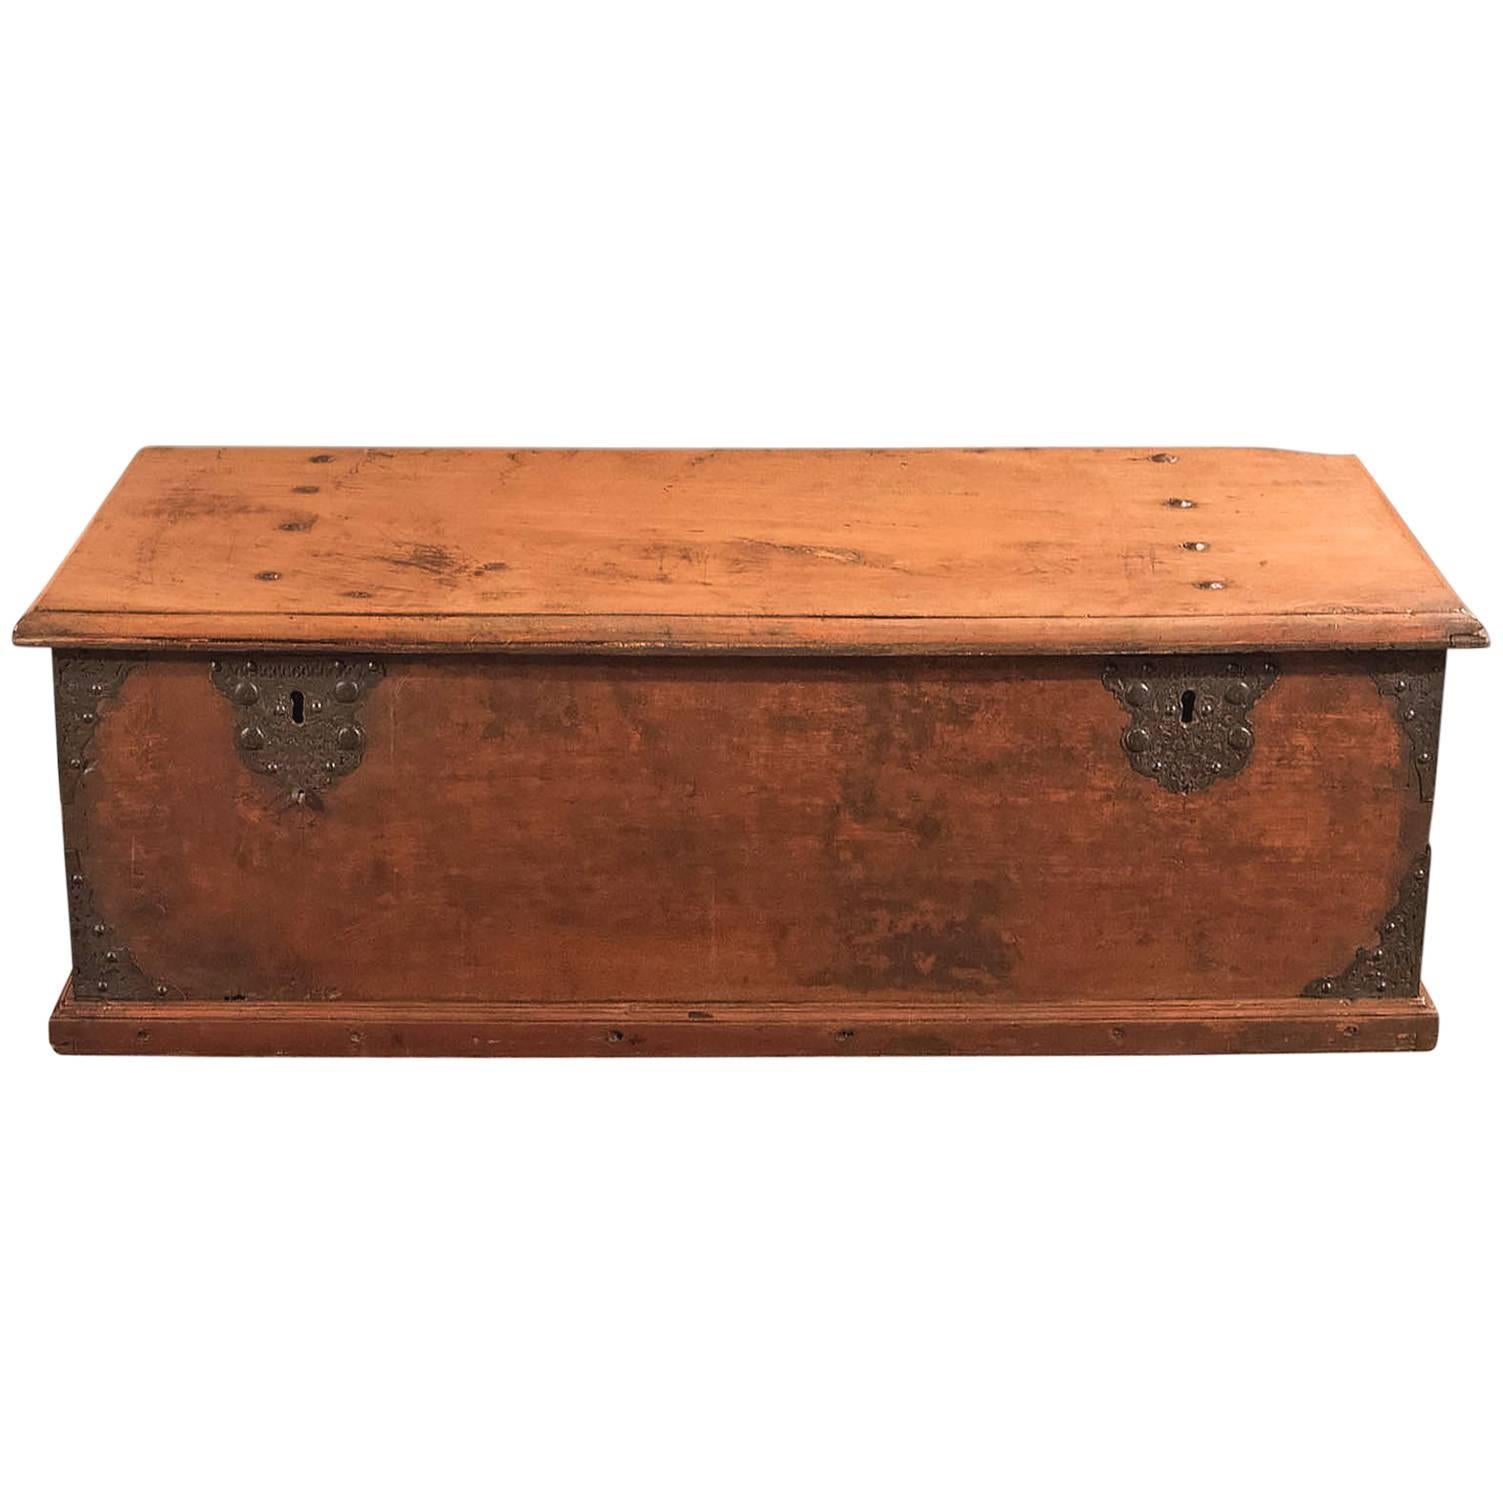 Antique Chest, Colonial Hardwood Trunk, Early 19th Century